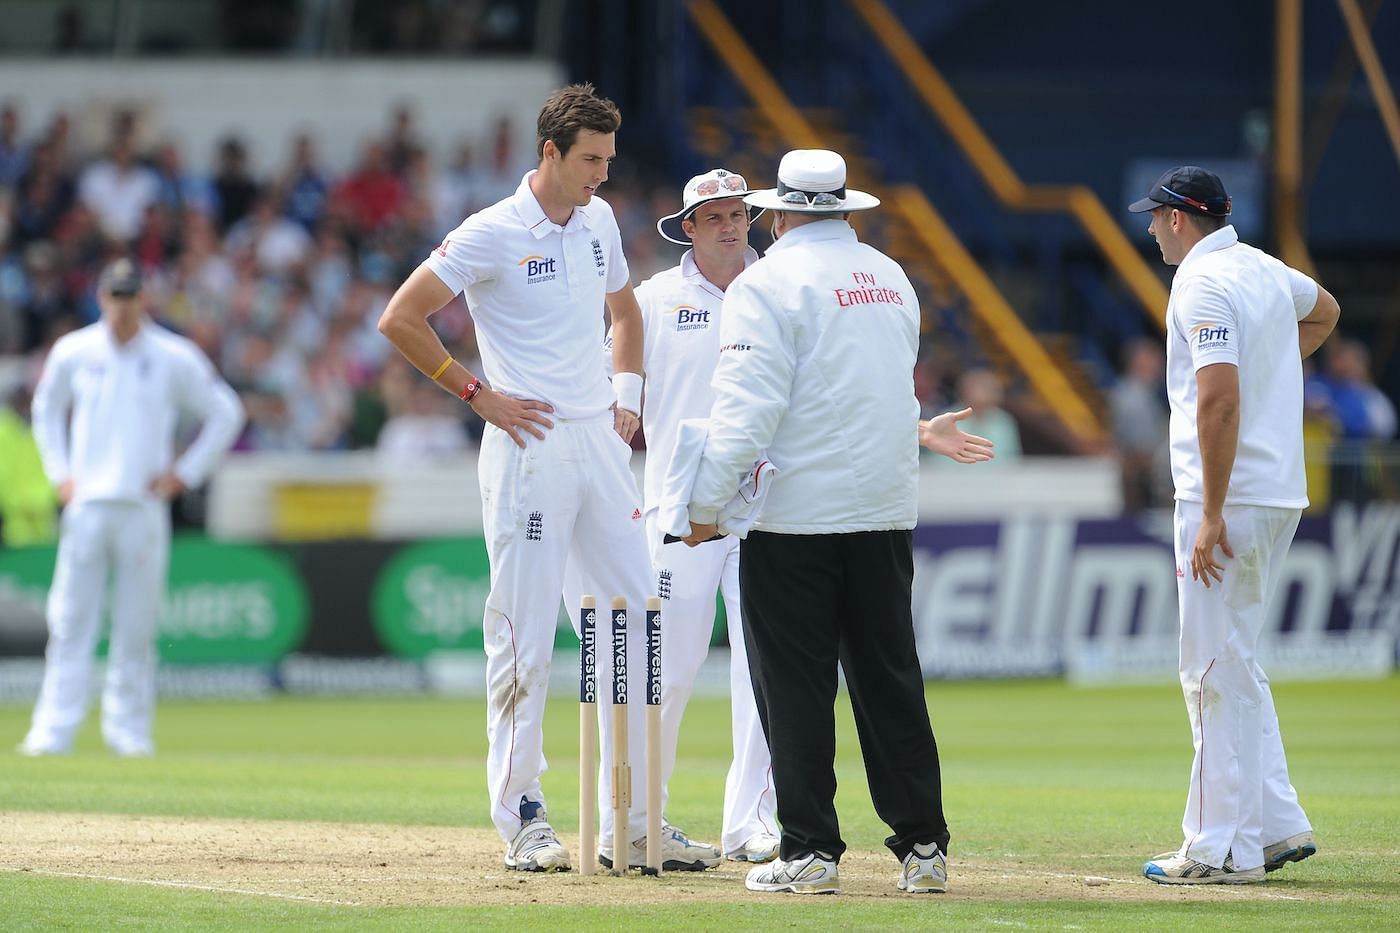 Steven Finn was a bowler who could have been much more for England (Credits: Cricket Monthly)